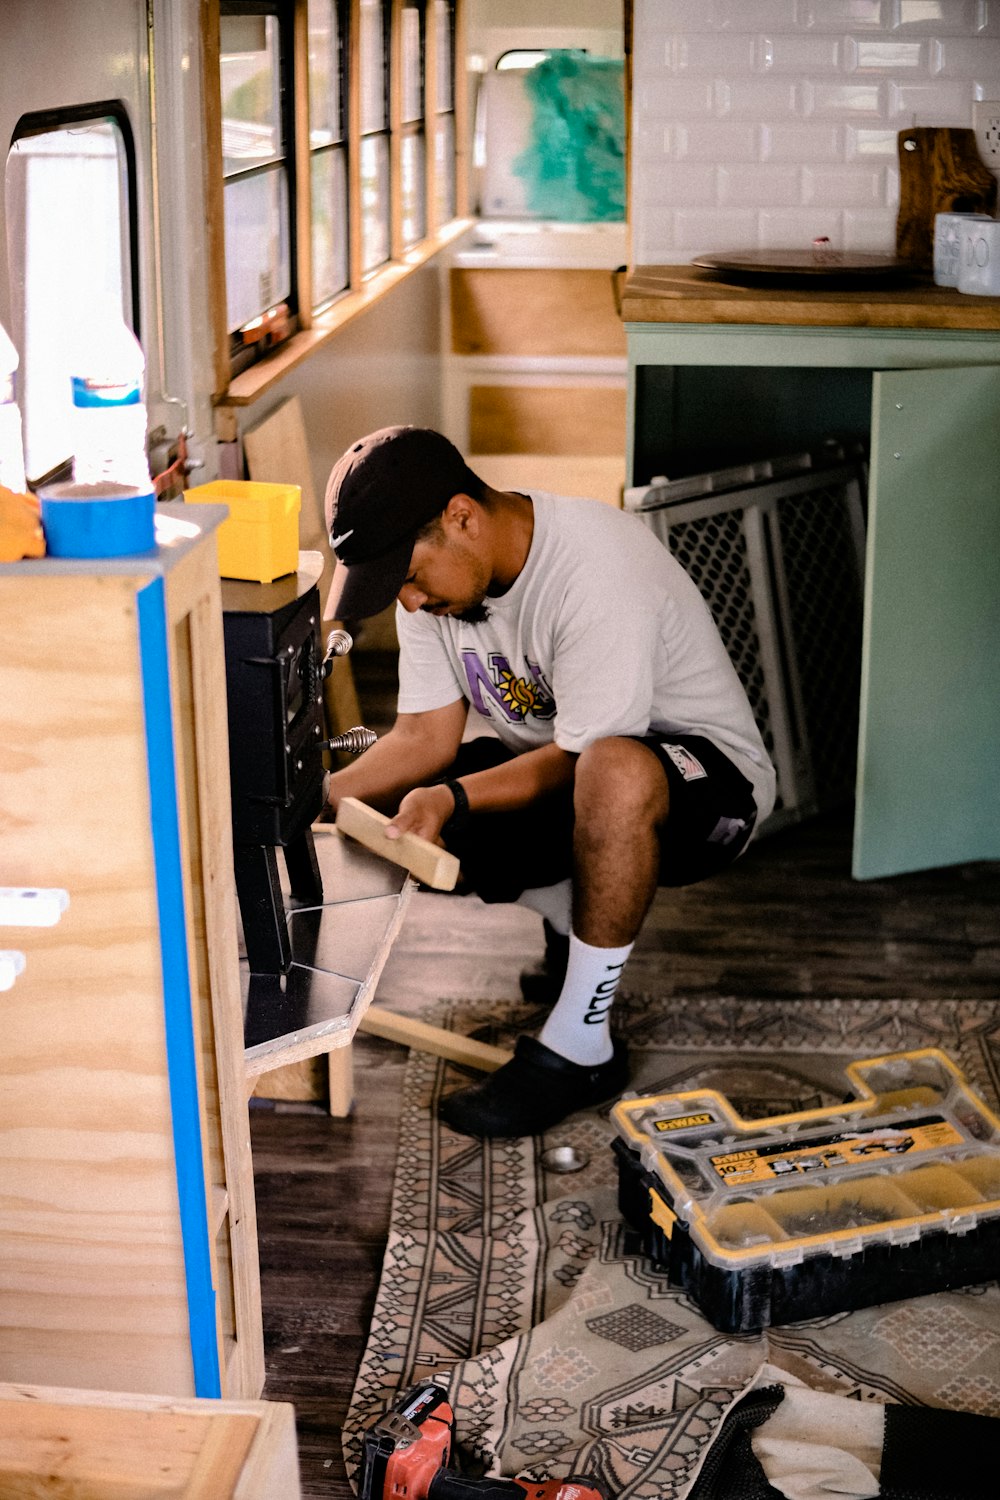 a man working on a stove in a kitchen